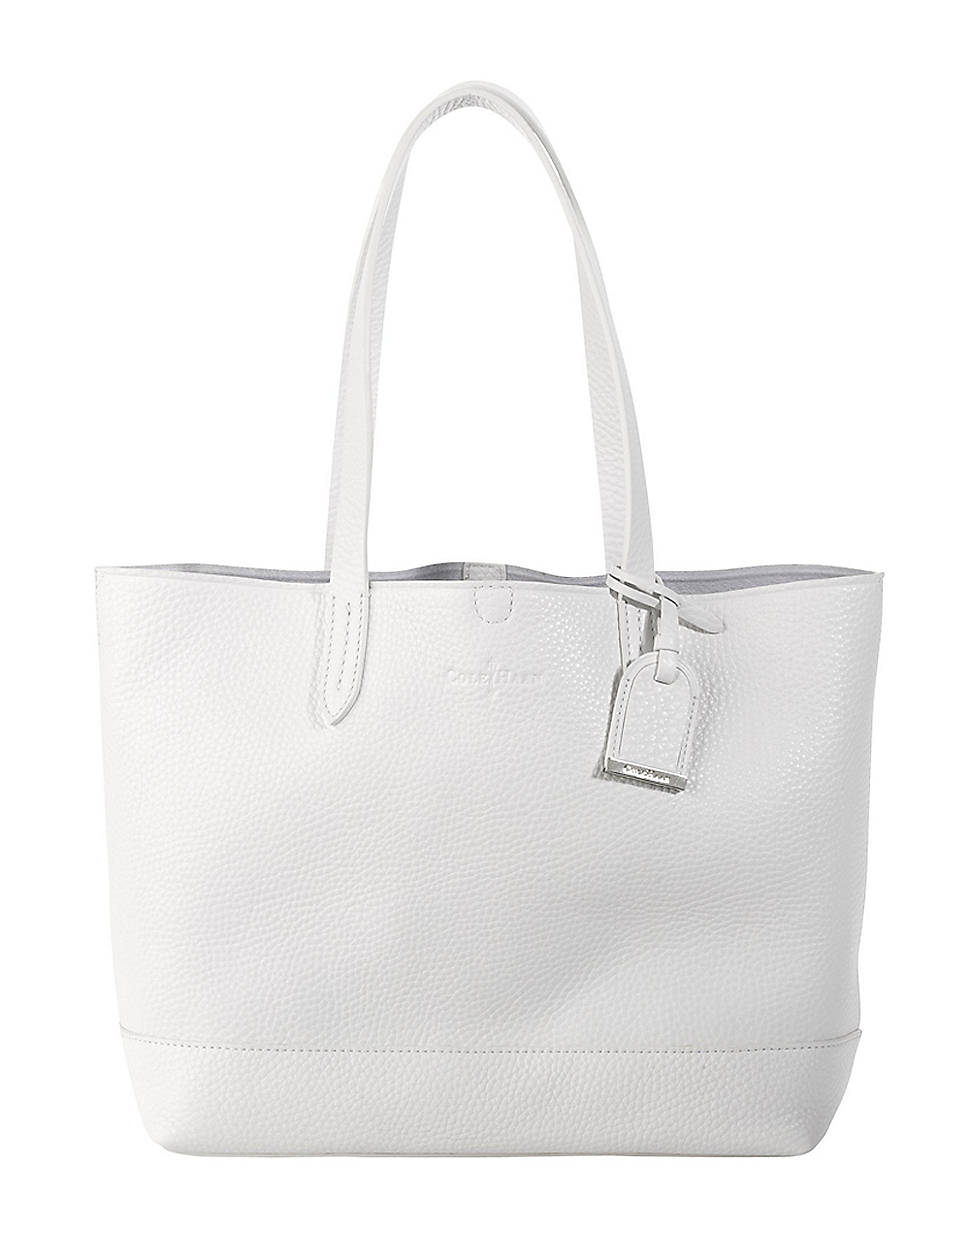 Cole Haan Haven Leather Small Tote Bag in White (optic white) | Lyst